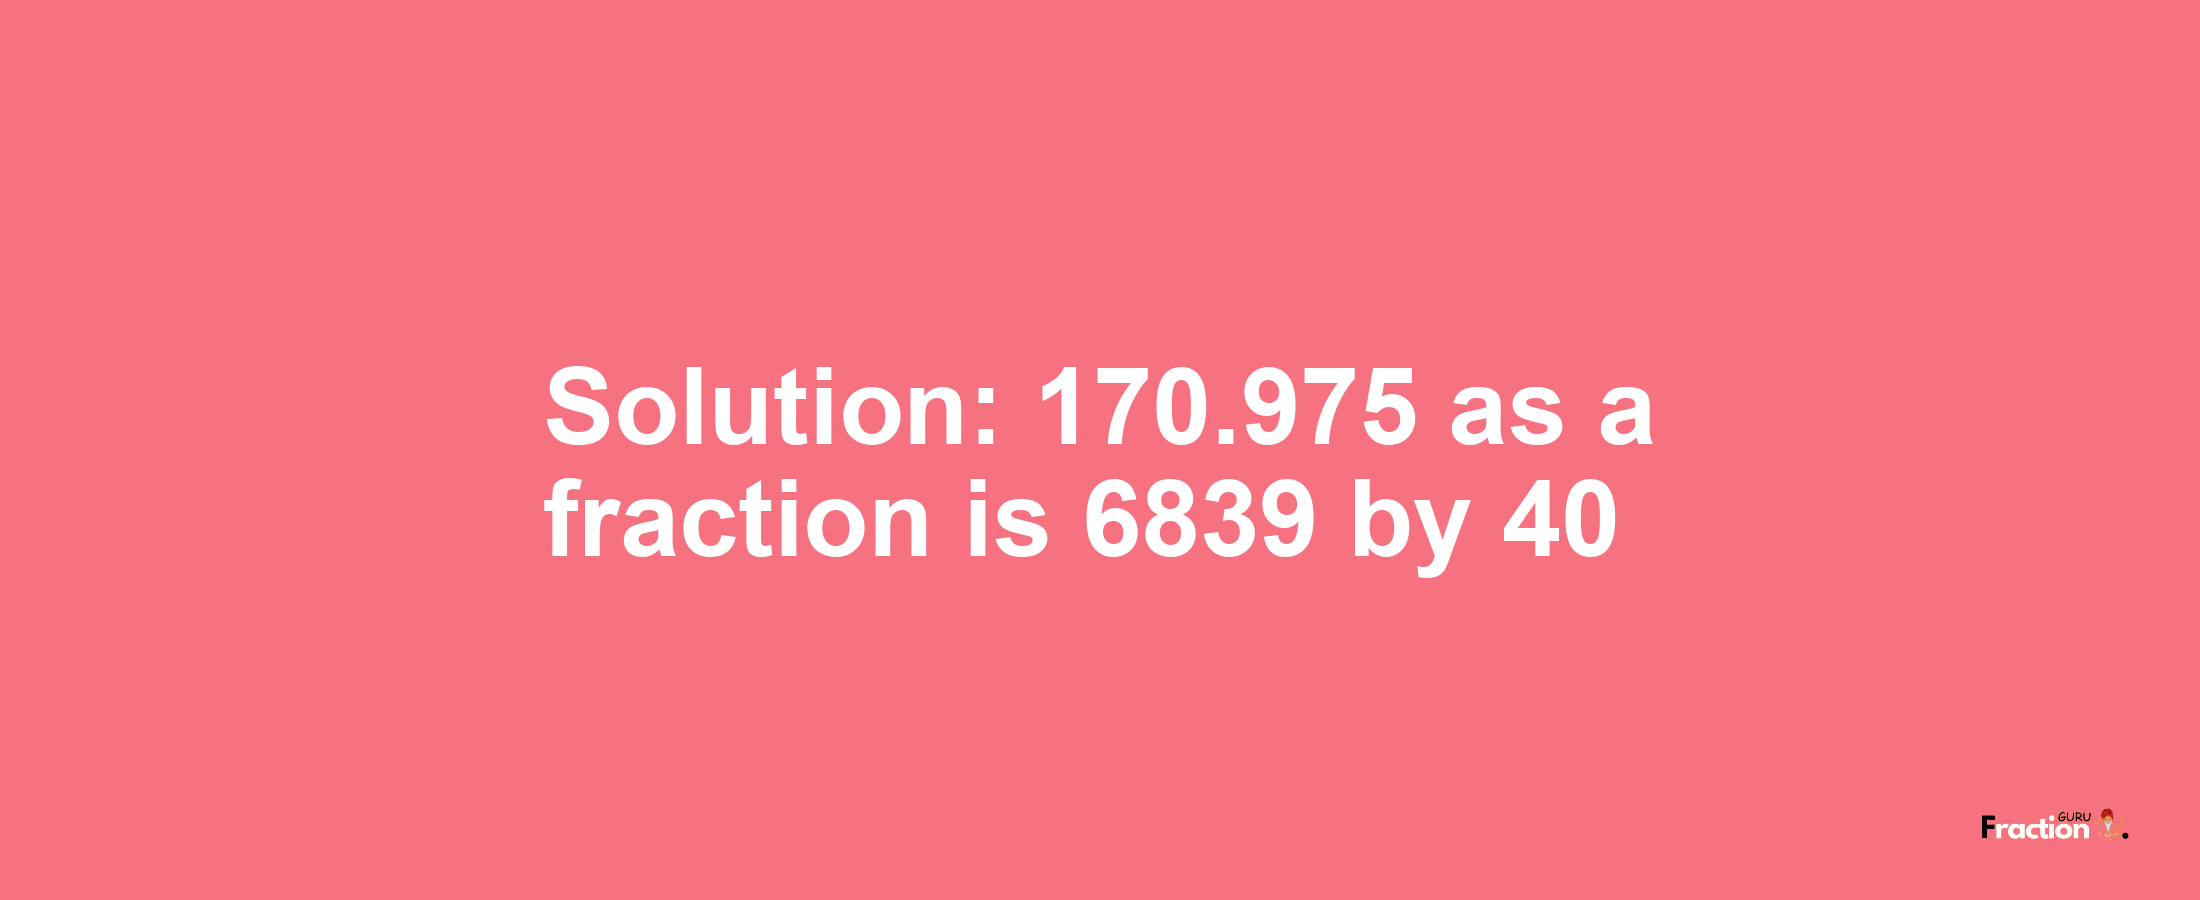 Solution:170.975 as a fraction is 6839/40